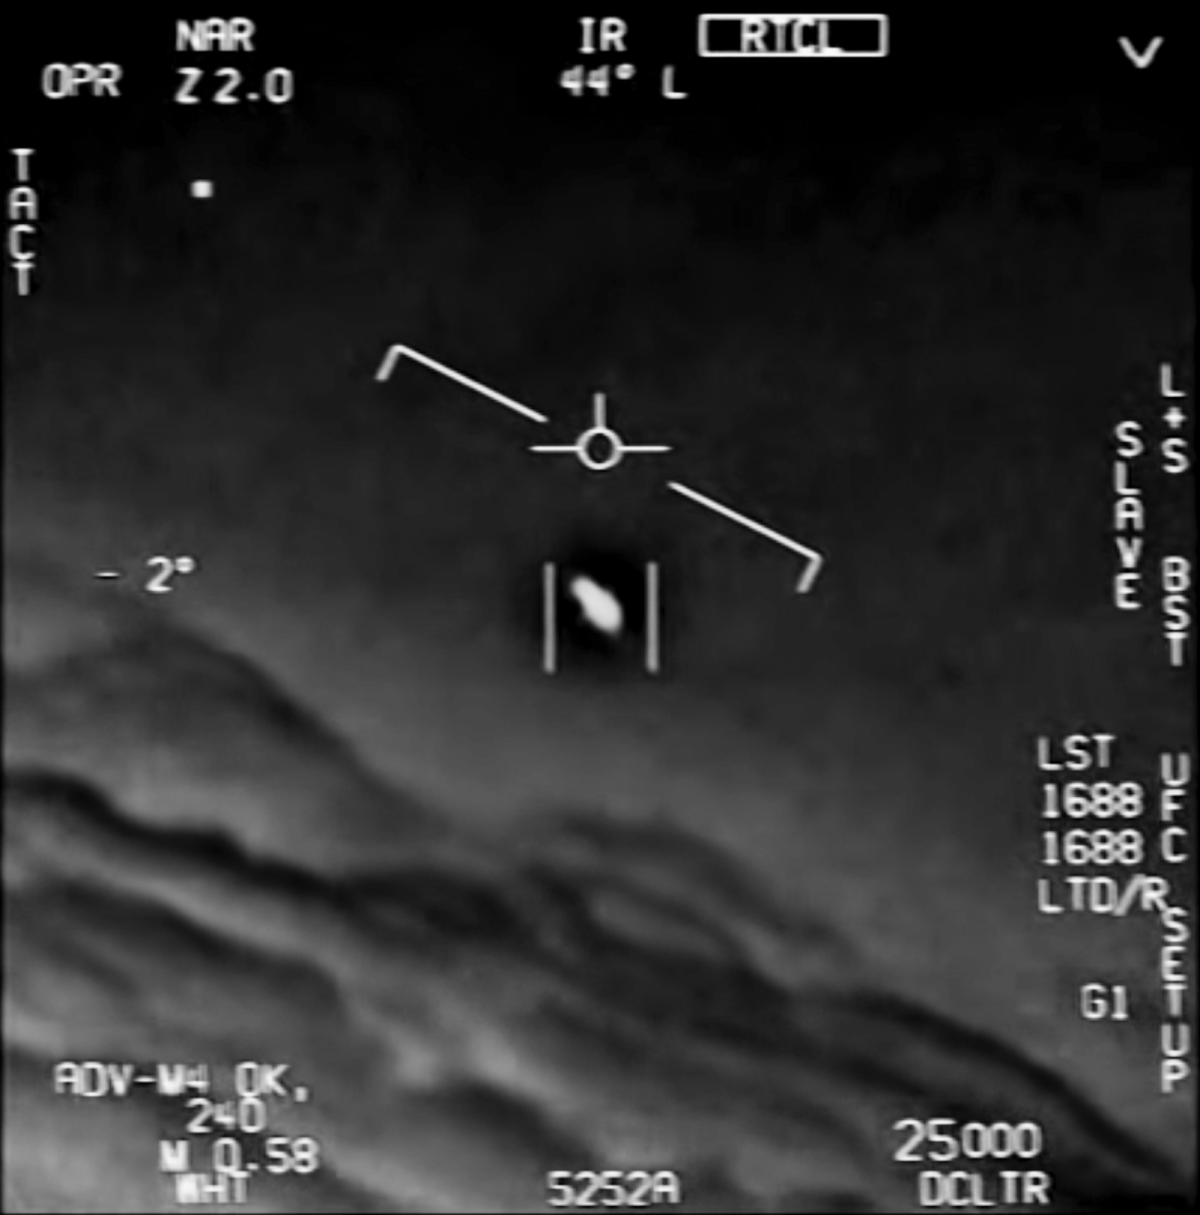 California and Florida Report Most UFO Sightings